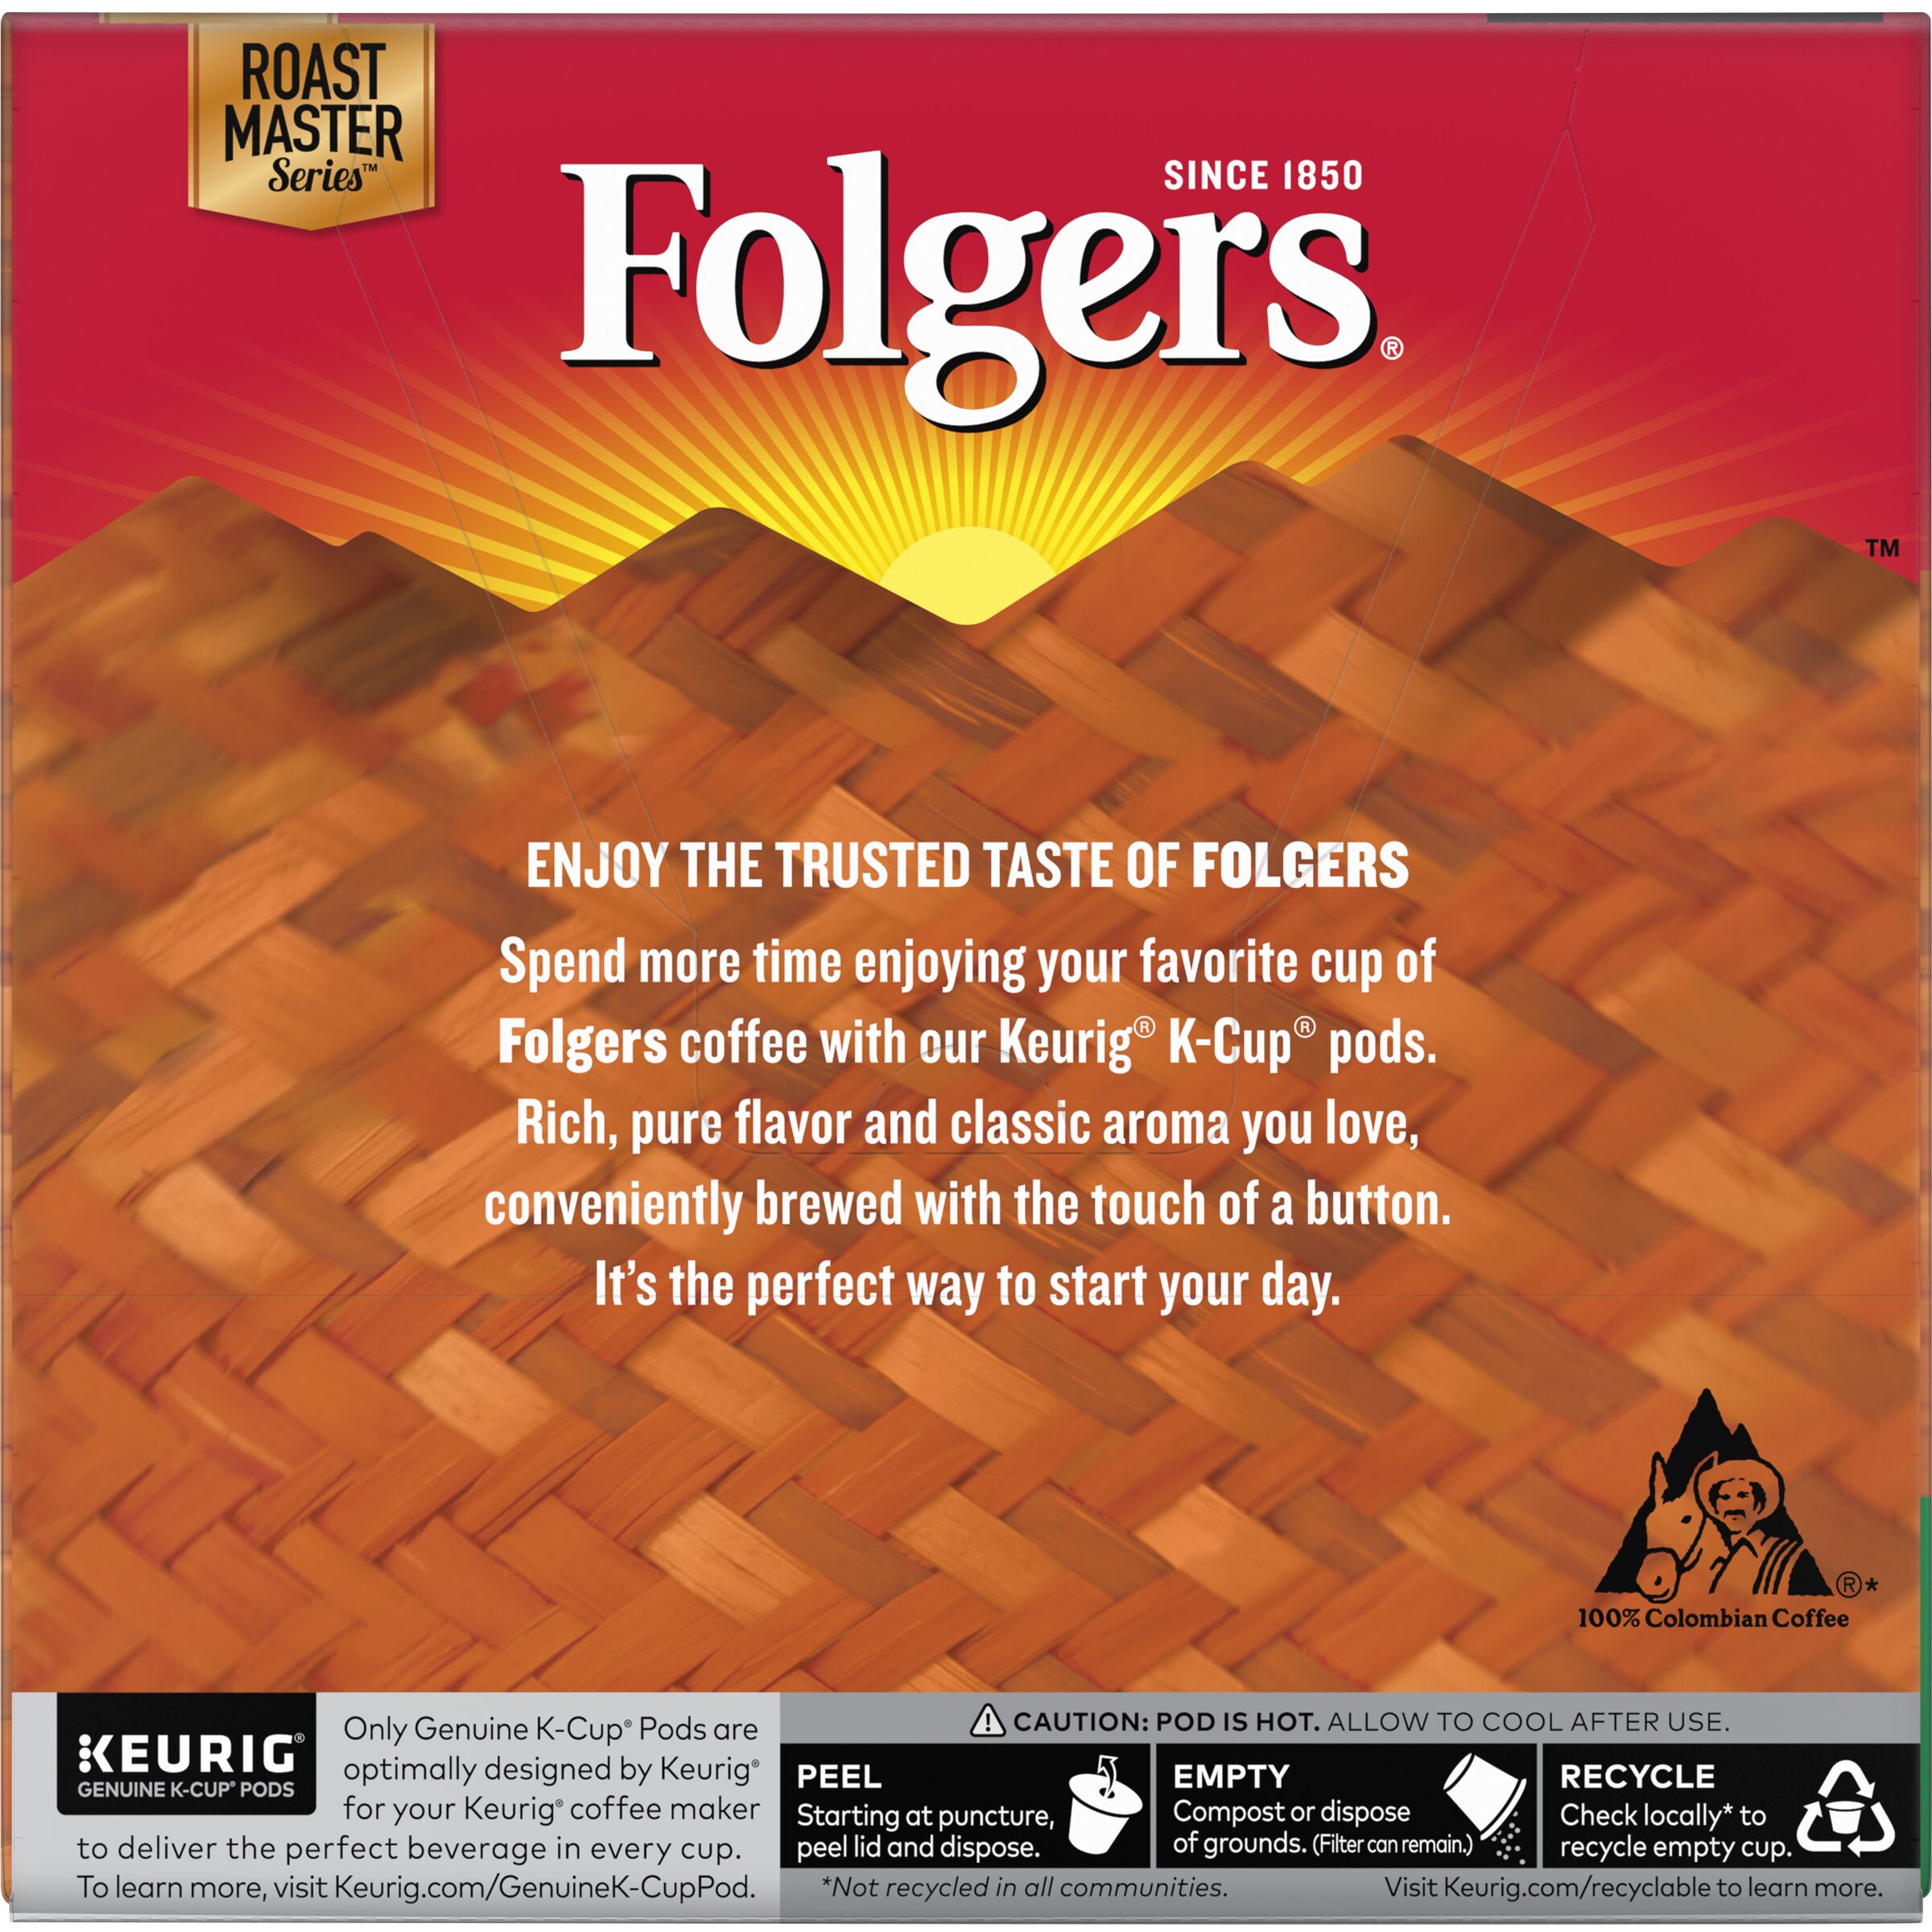 Folgers 100% Colombian Decaf Coffee, Medium-Dark Roast, K-Cup Pods for Keurig K-Cup Brewers, 18-Count - image 3 of 5